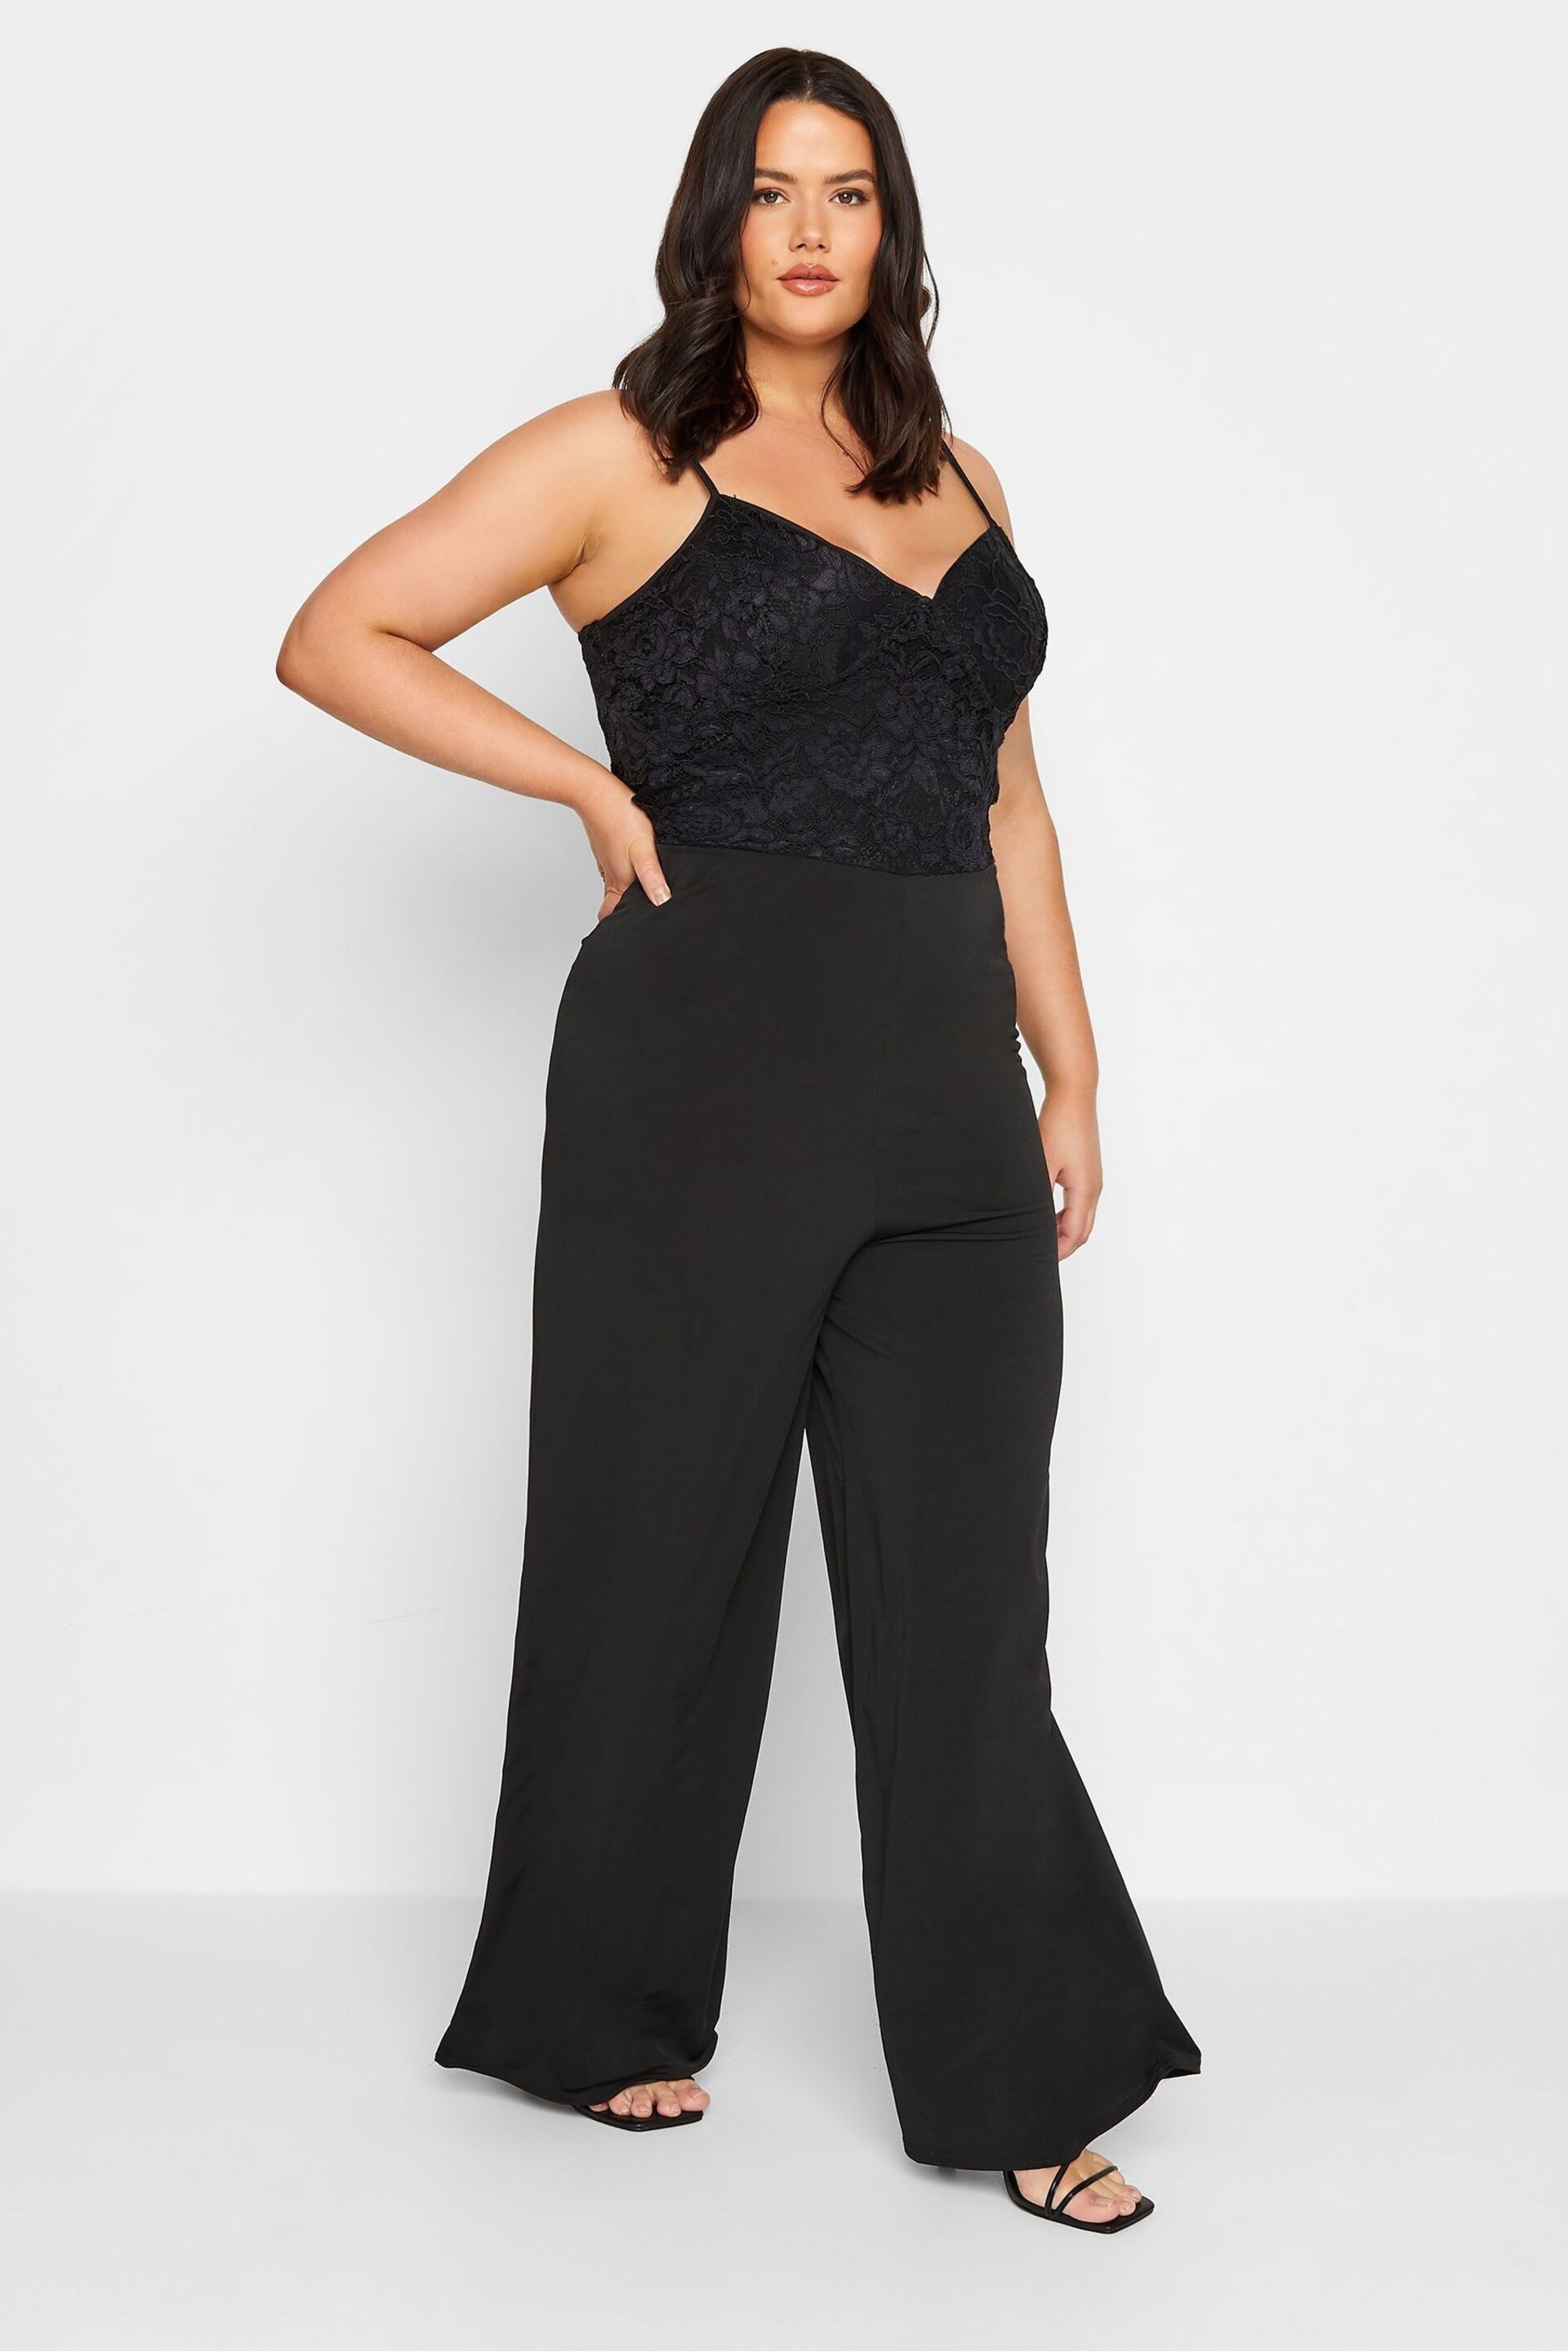 Long Tall Sally Black Lace Cami Stretch Jumpsuit - Image 3 of 4